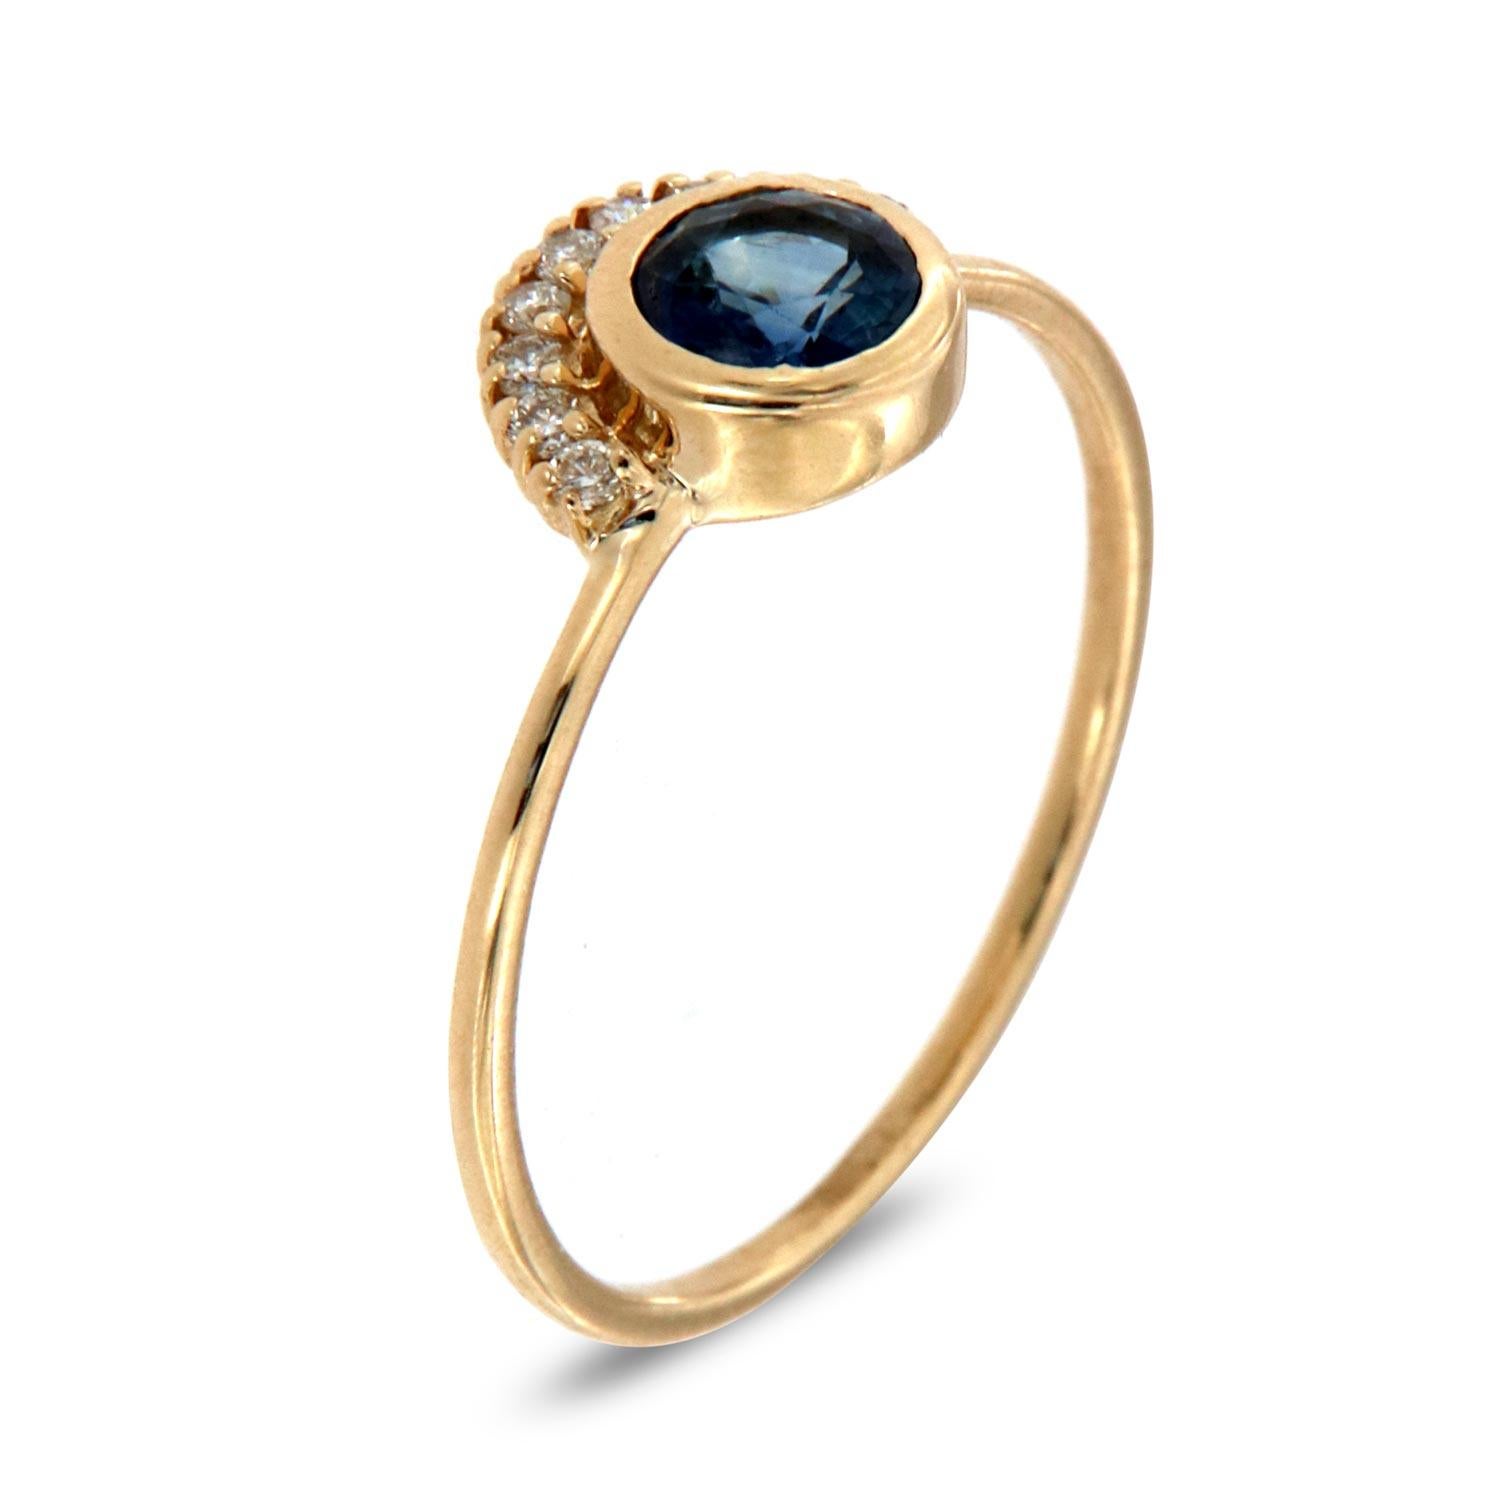 This petite fashion ring is impressive in its vintage appeal, featuring a bezeled natural blue round brilliant sapphire, accented with round brilliant diamonds. Experience the difference in person!

Product details: 

Center Gemstone Type: